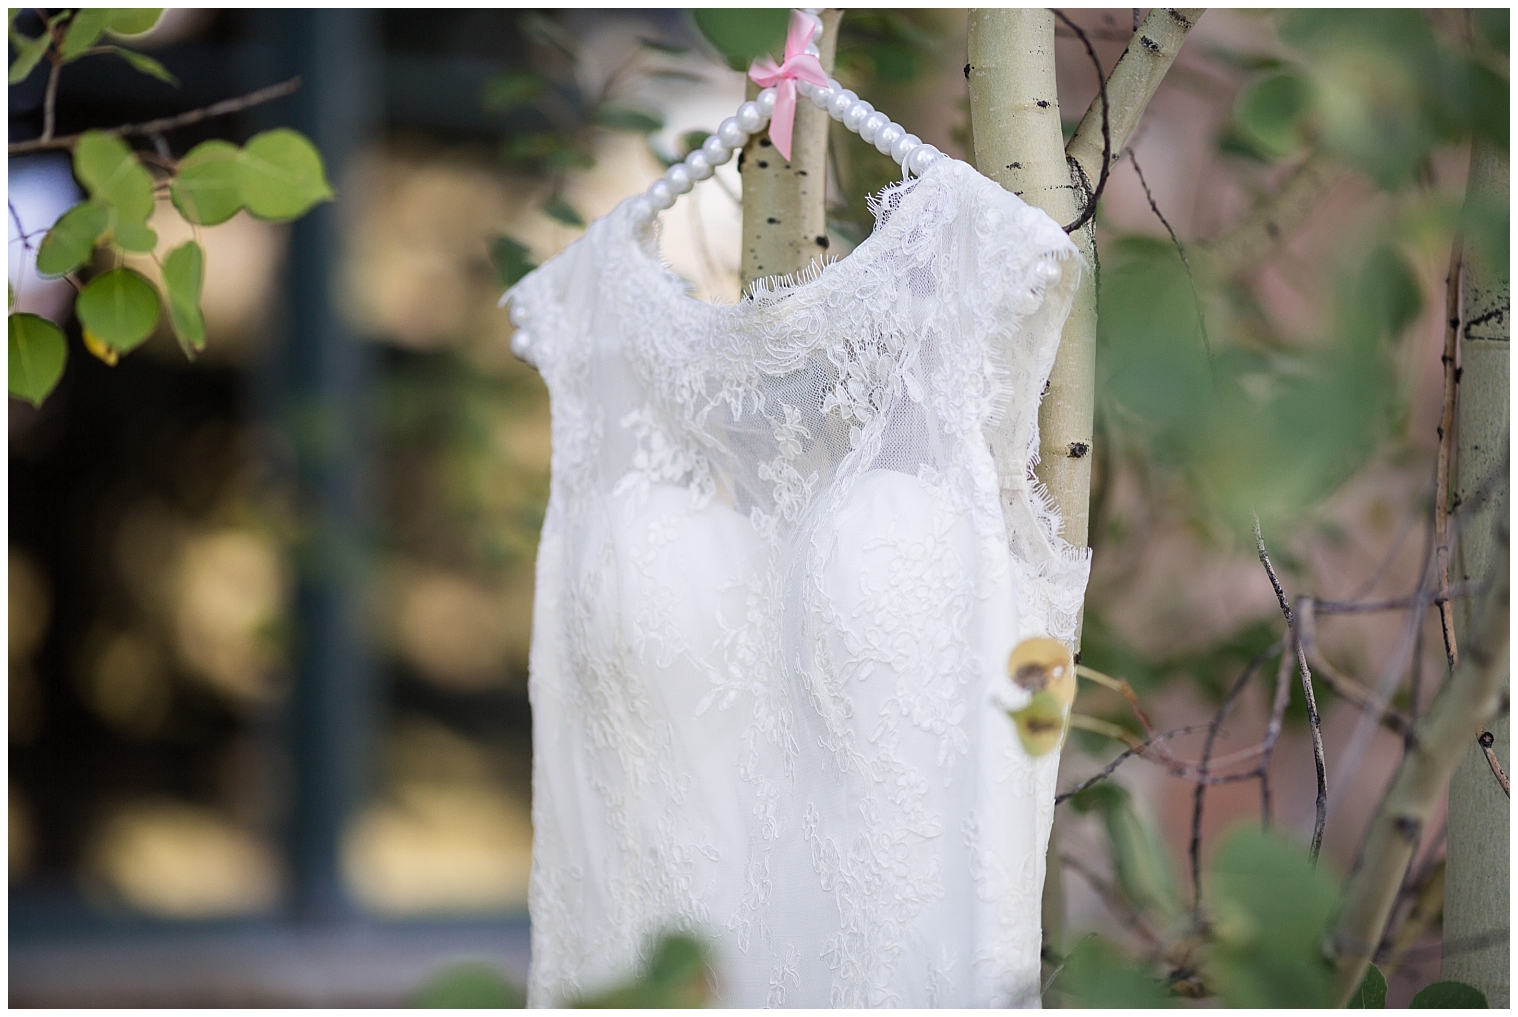 Wedding dress hanging on a tree before a Mountain Thunder wedding.